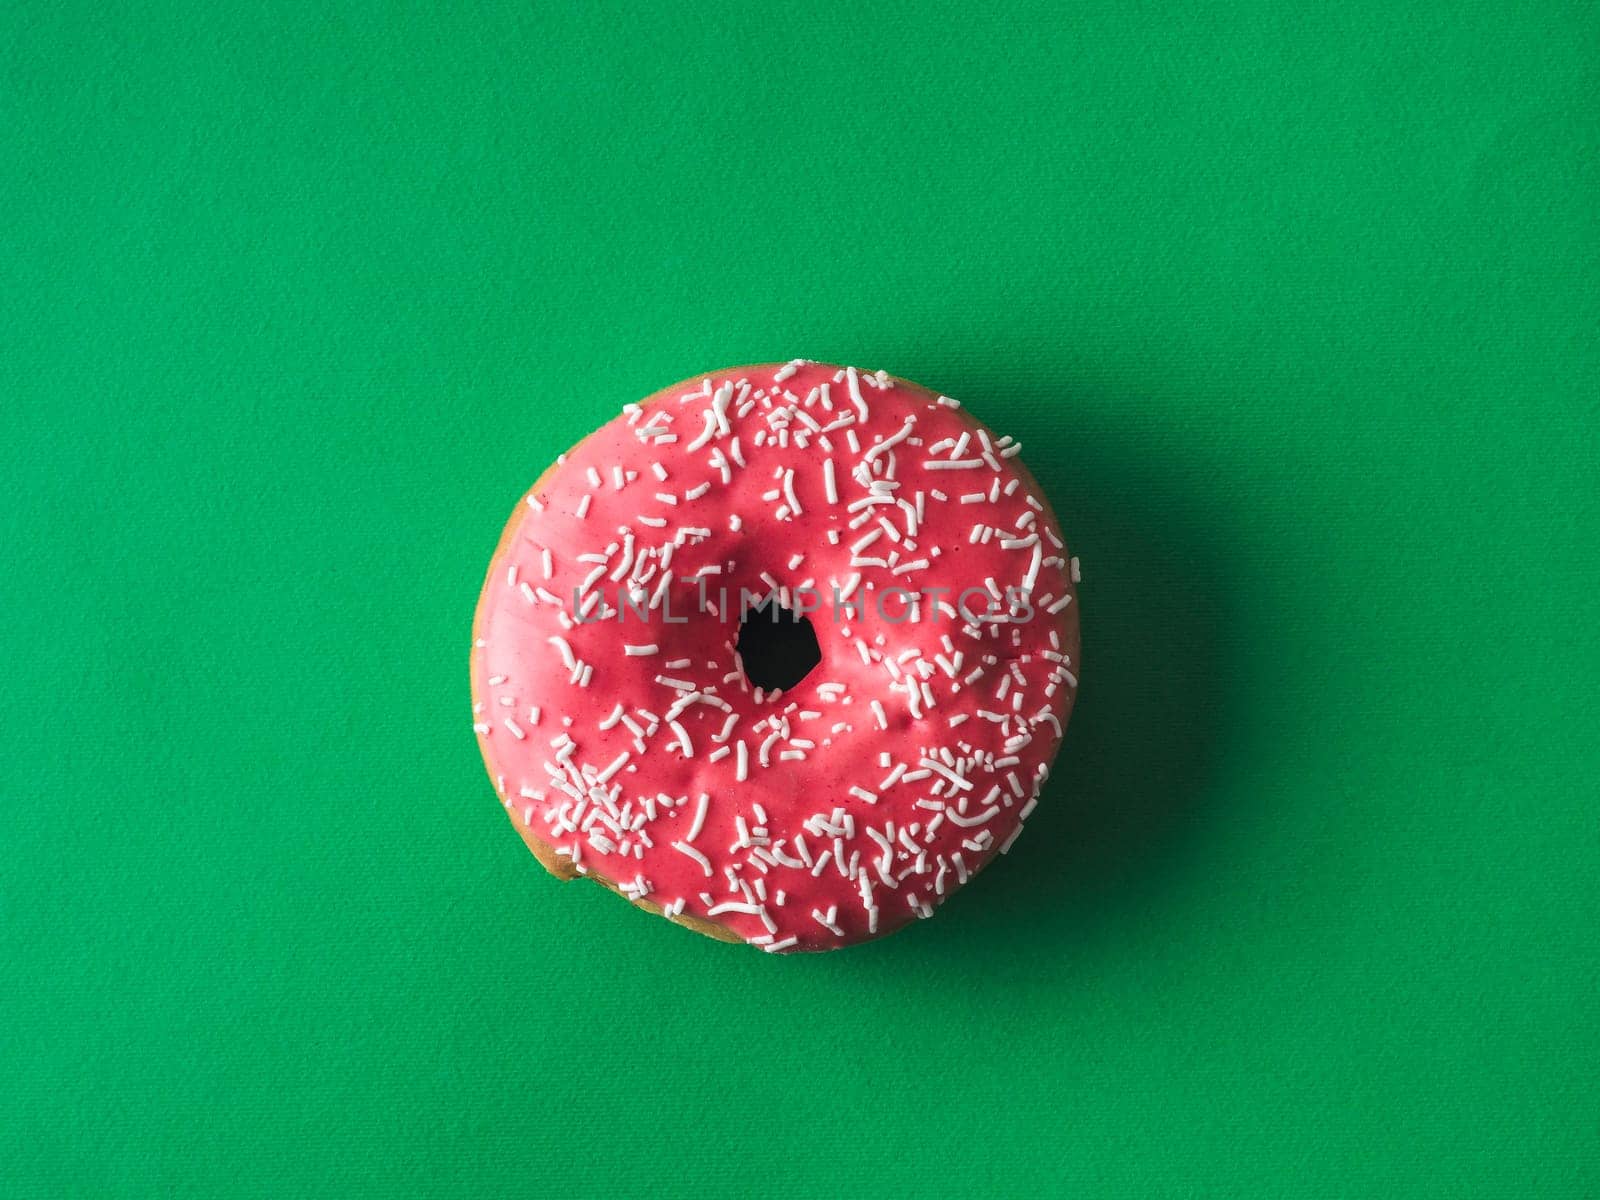 Top view of pink glazed donut on green background. Glazed and topping sprinkle pink doughnut on rich green background. Top view or flat lay.